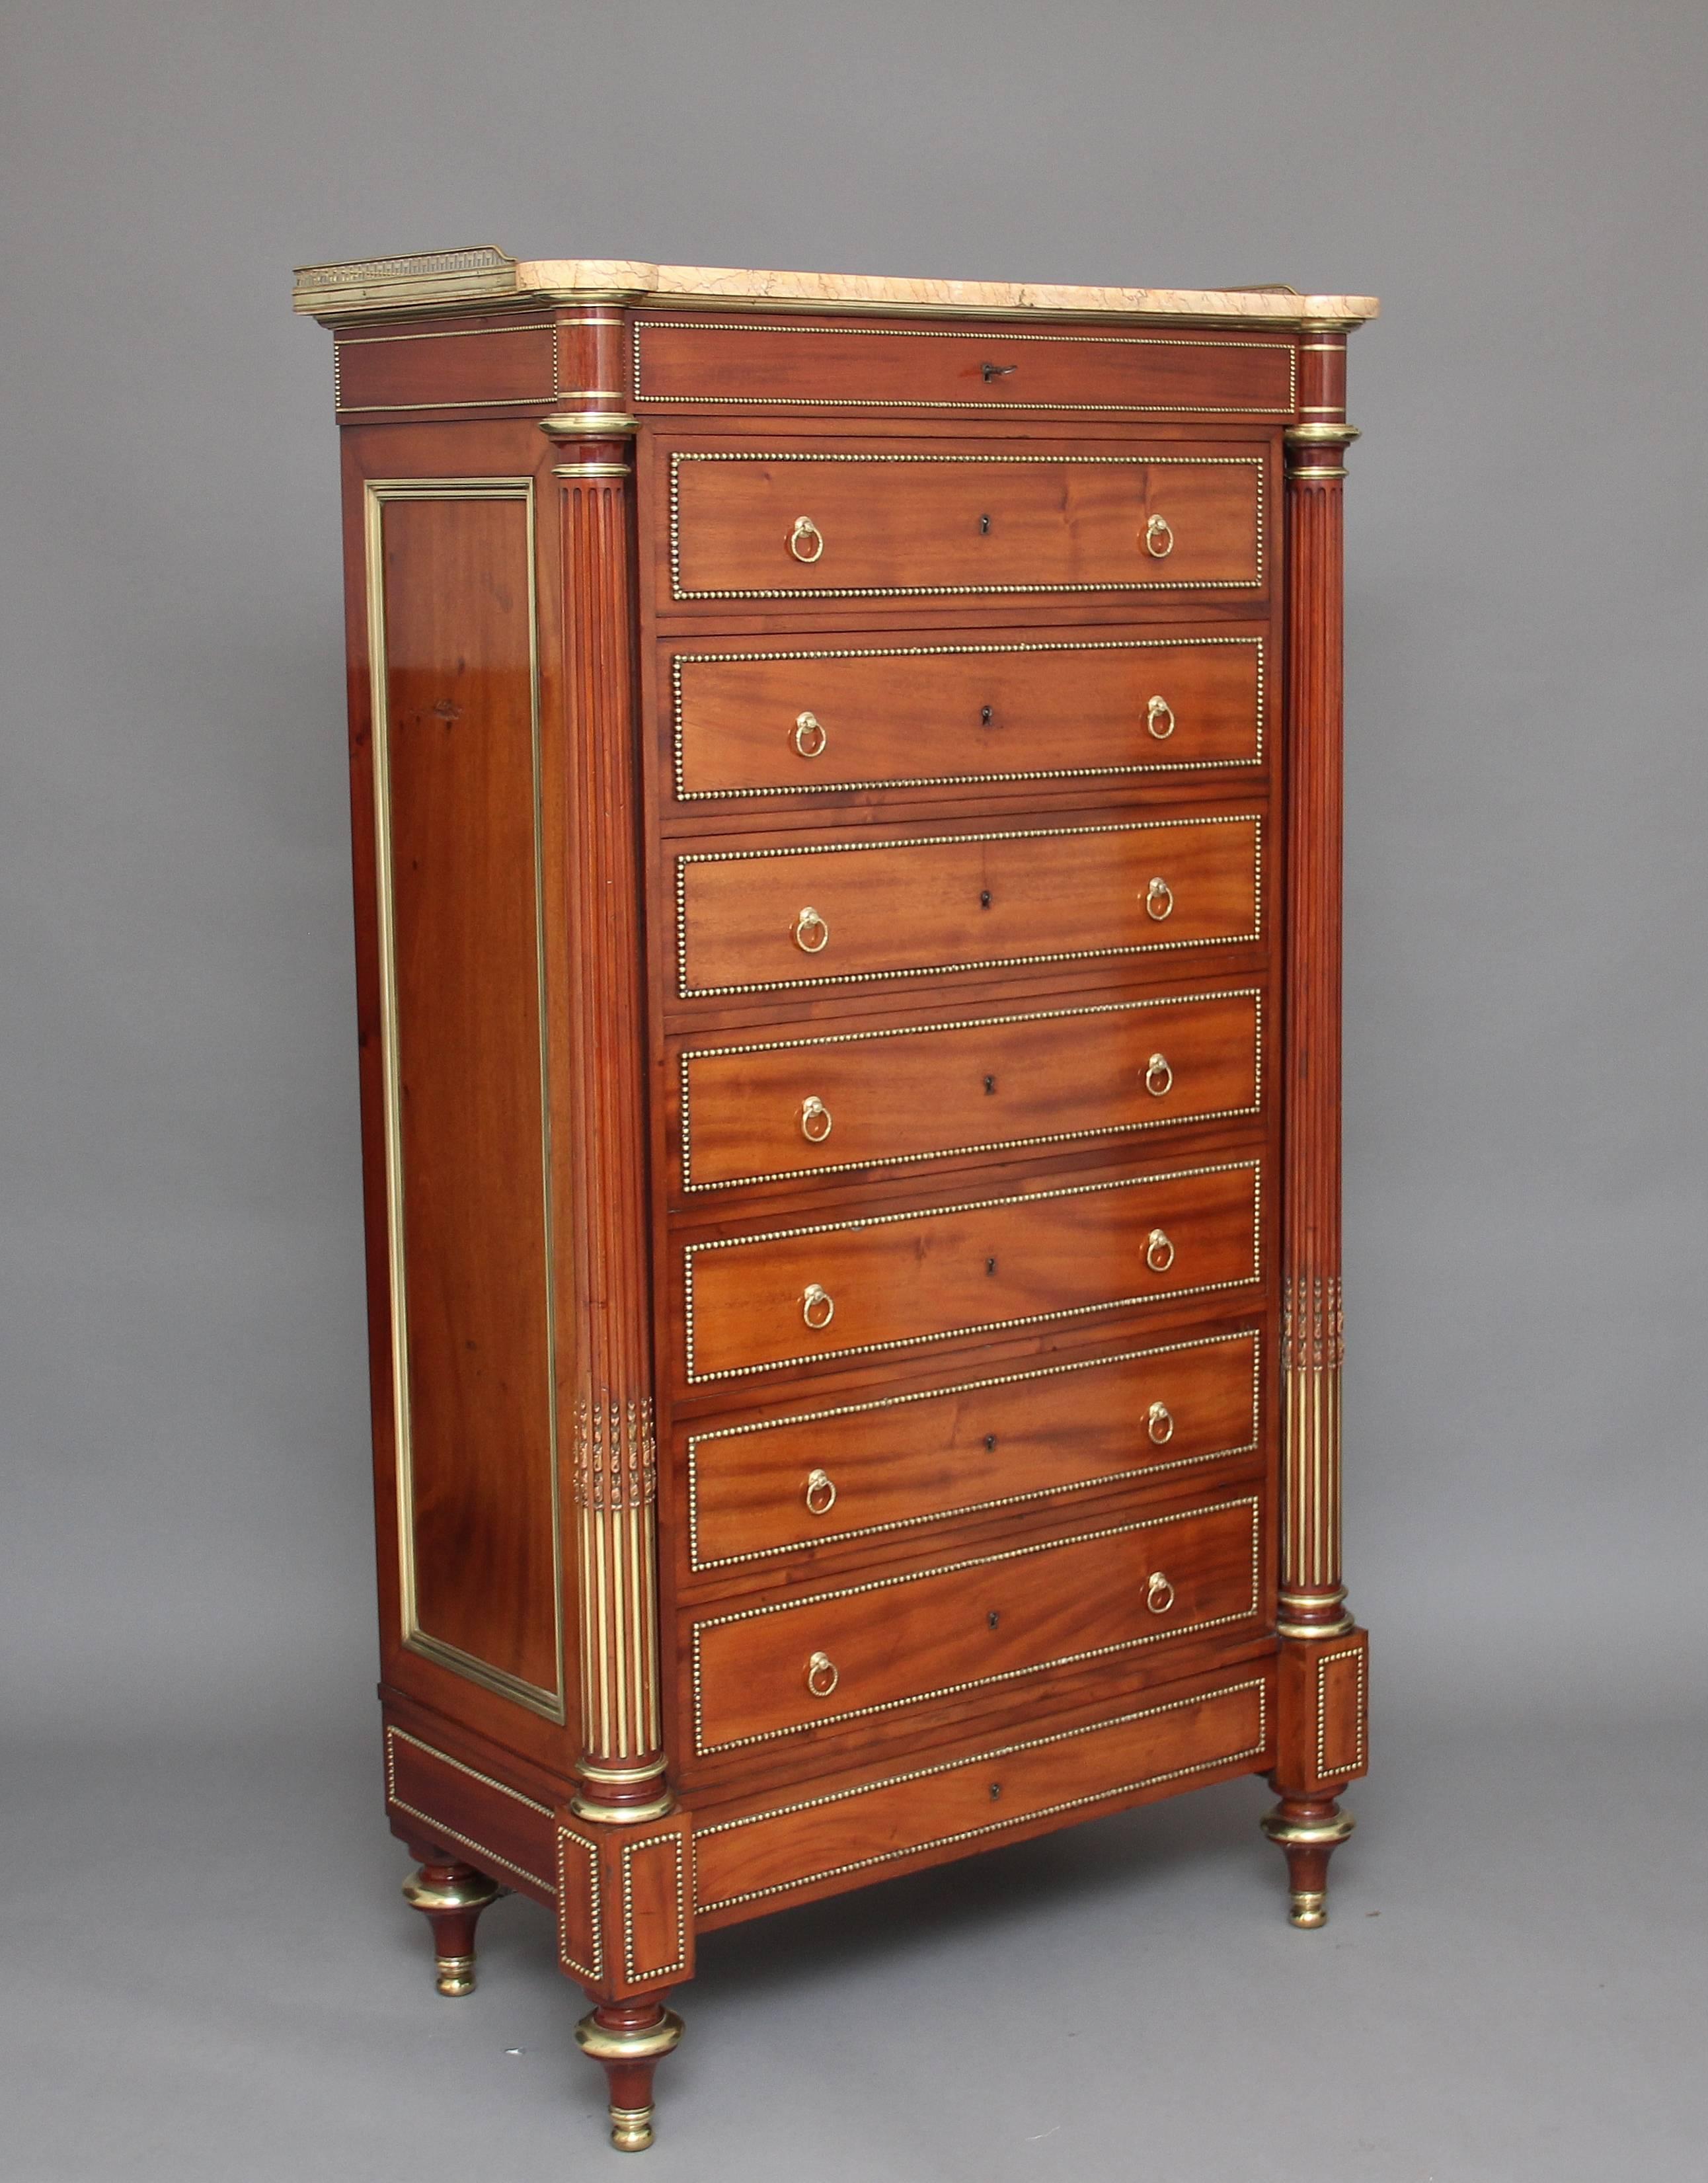 19th century, French mahogany semanier chest of exceptional quality, the chest consisting of nine oak lined drawers with original brass ring handles, flanked by wonderful fluted columns decorated with brass inserts, the original finely veined yellow